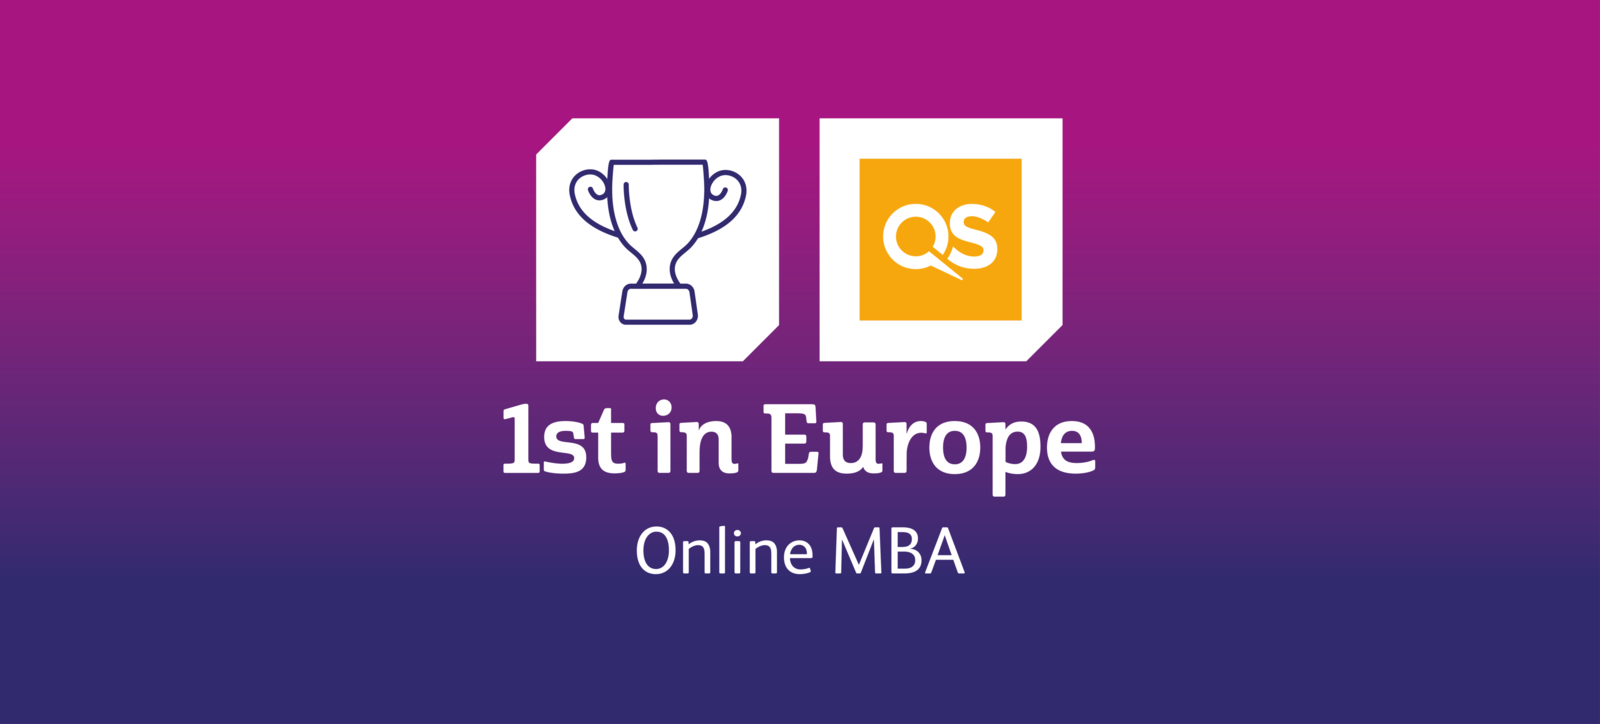 QS logo, trophy icon, and text showing Warwick Business School is ranked number one in Europe.